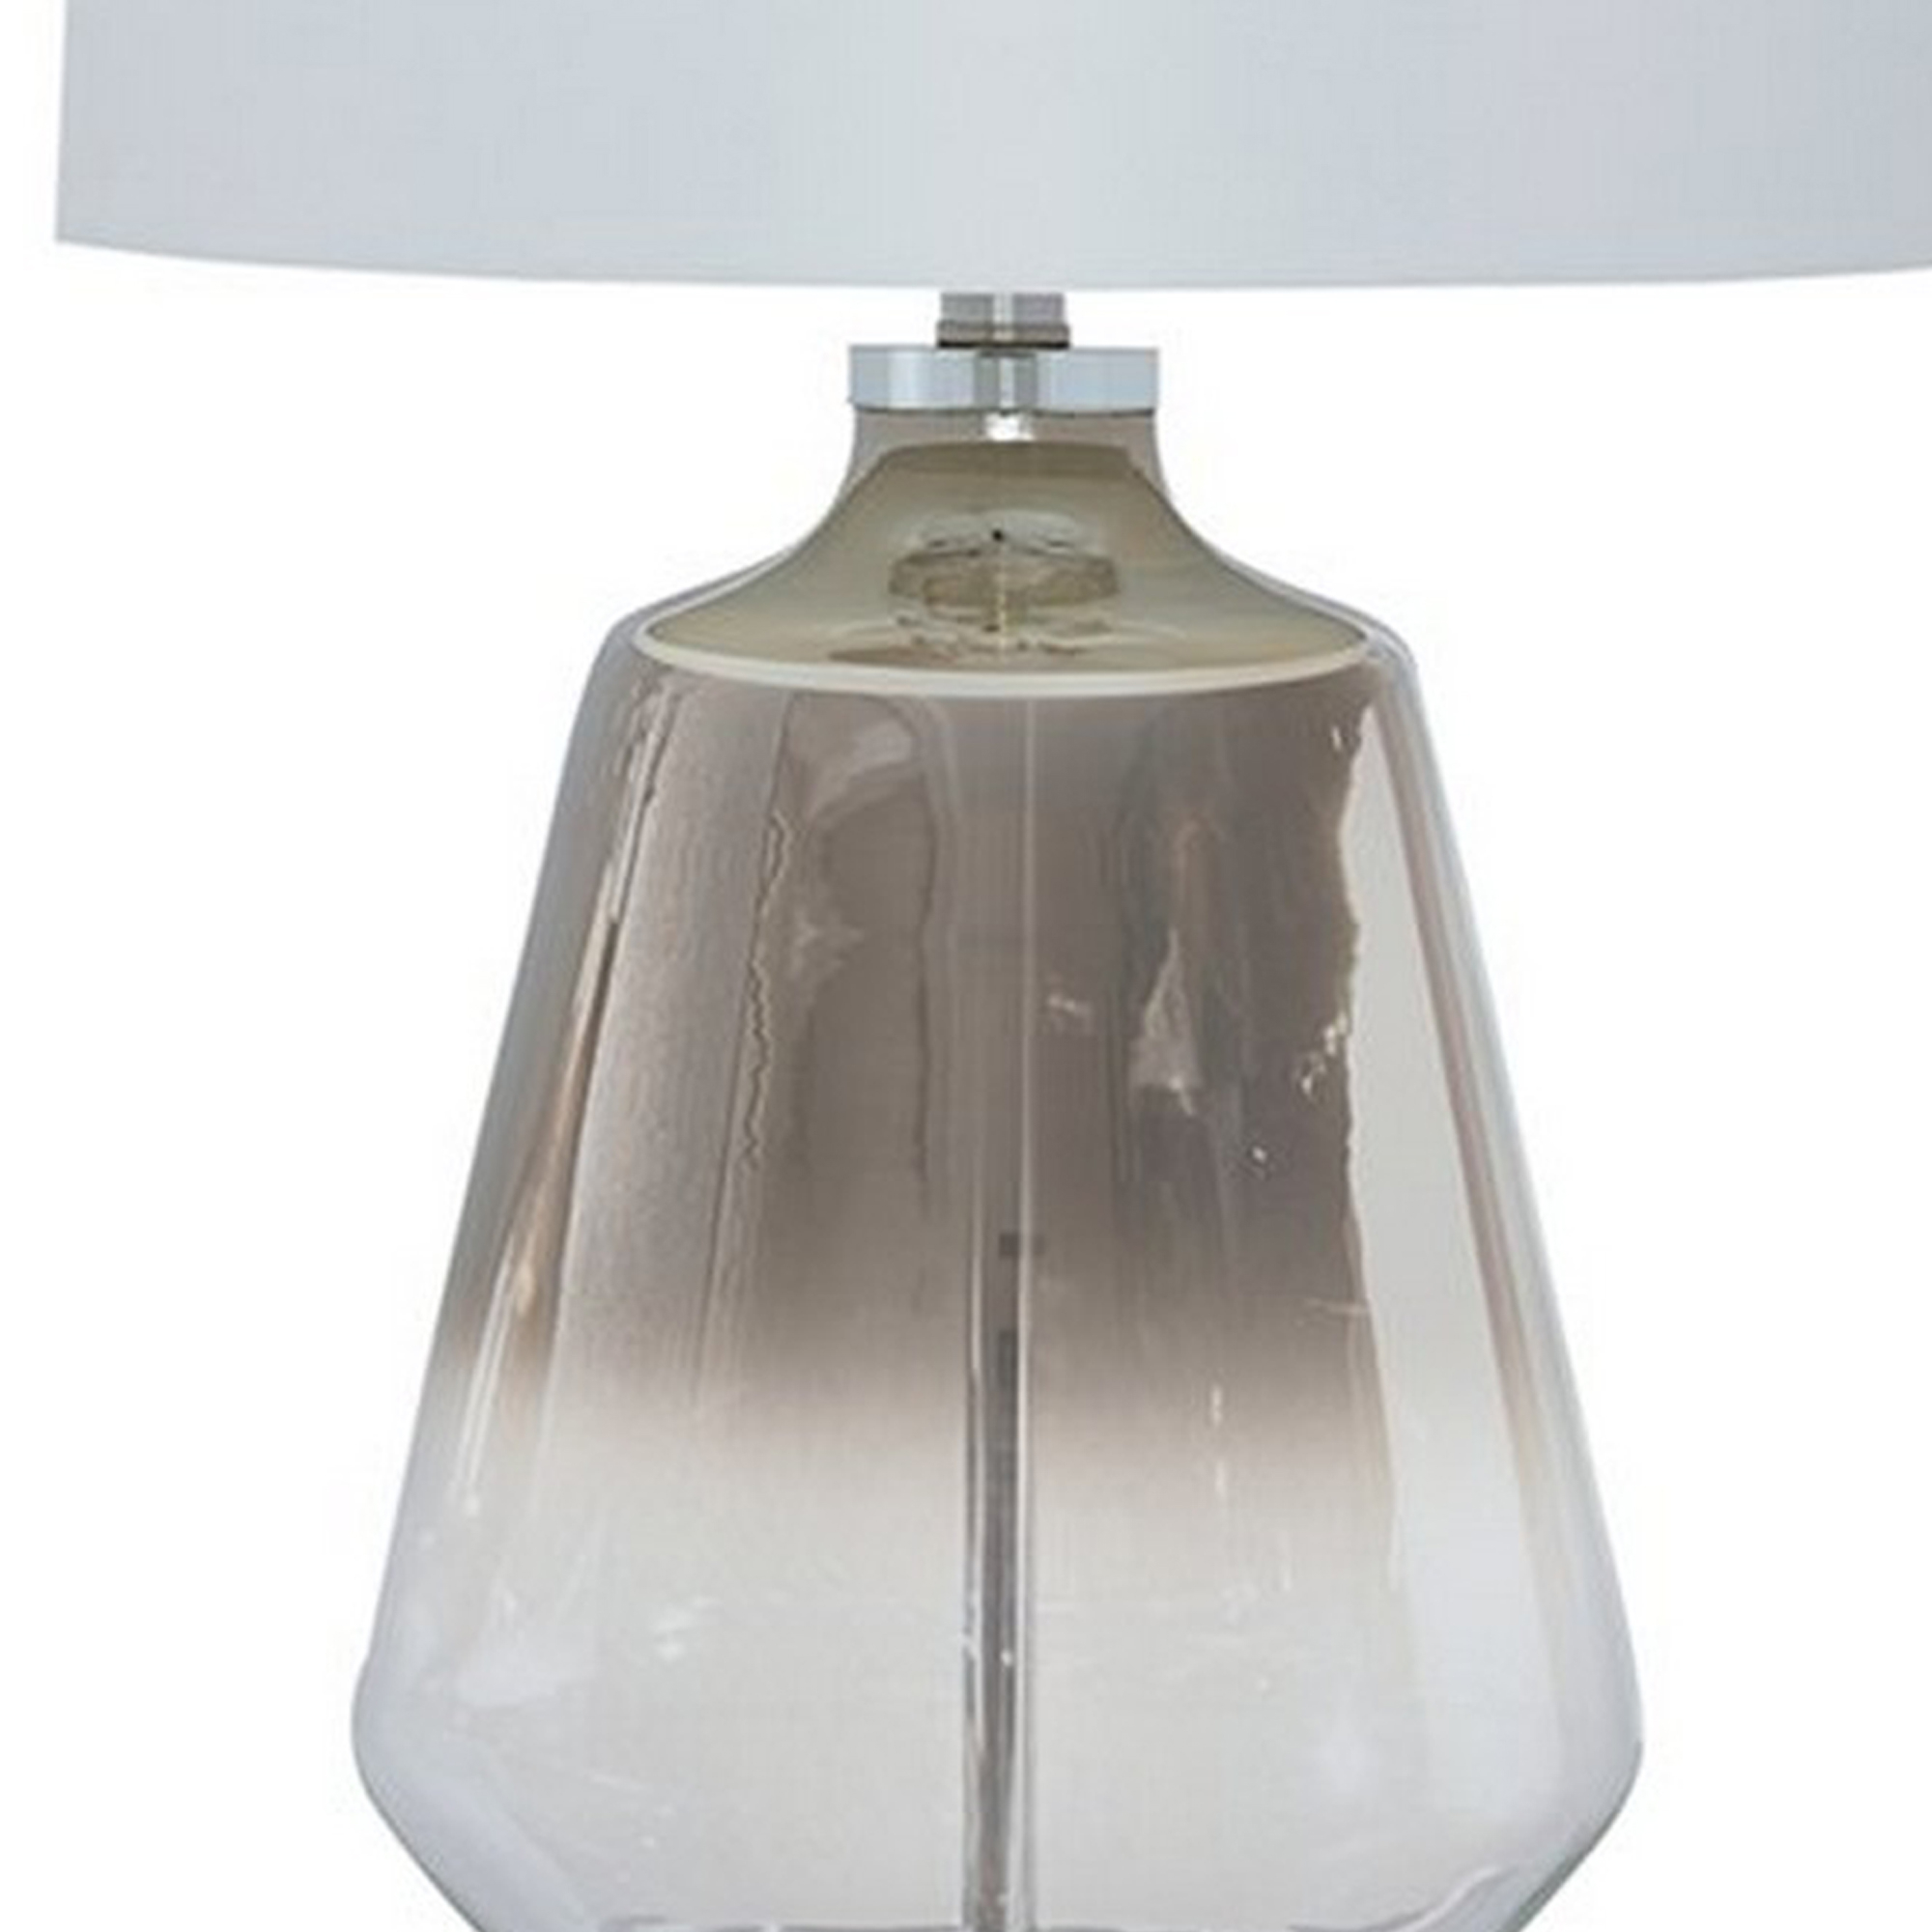 Sculptured Glass Frame Table Lamp With Fabric Shade, Gray And White- Saltoro Sherpi